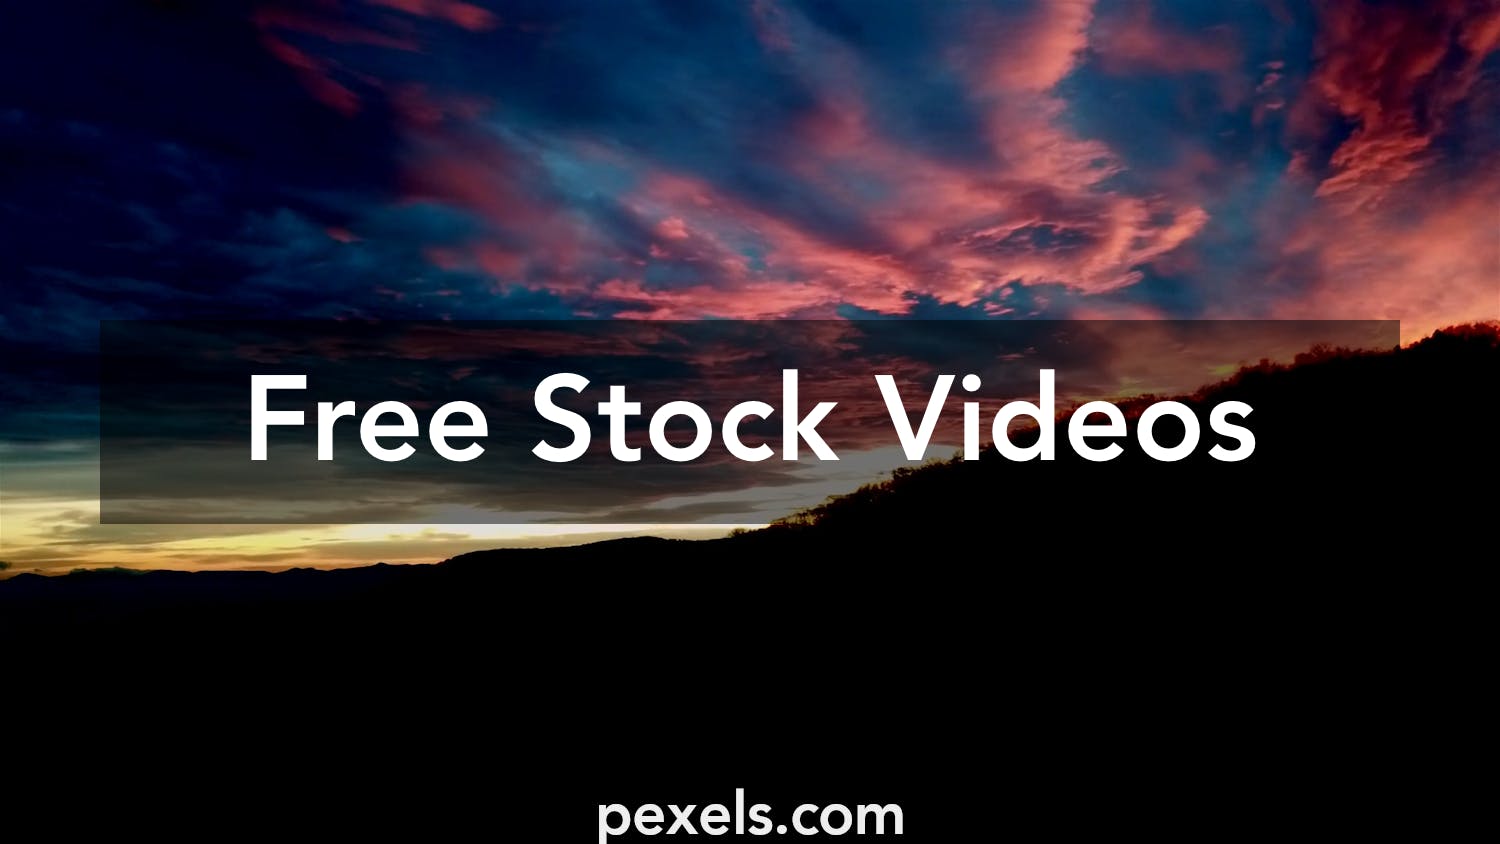 Hd Videos, Download The Best Free 4K Stock Video Footage & Hd Hd Video Clips